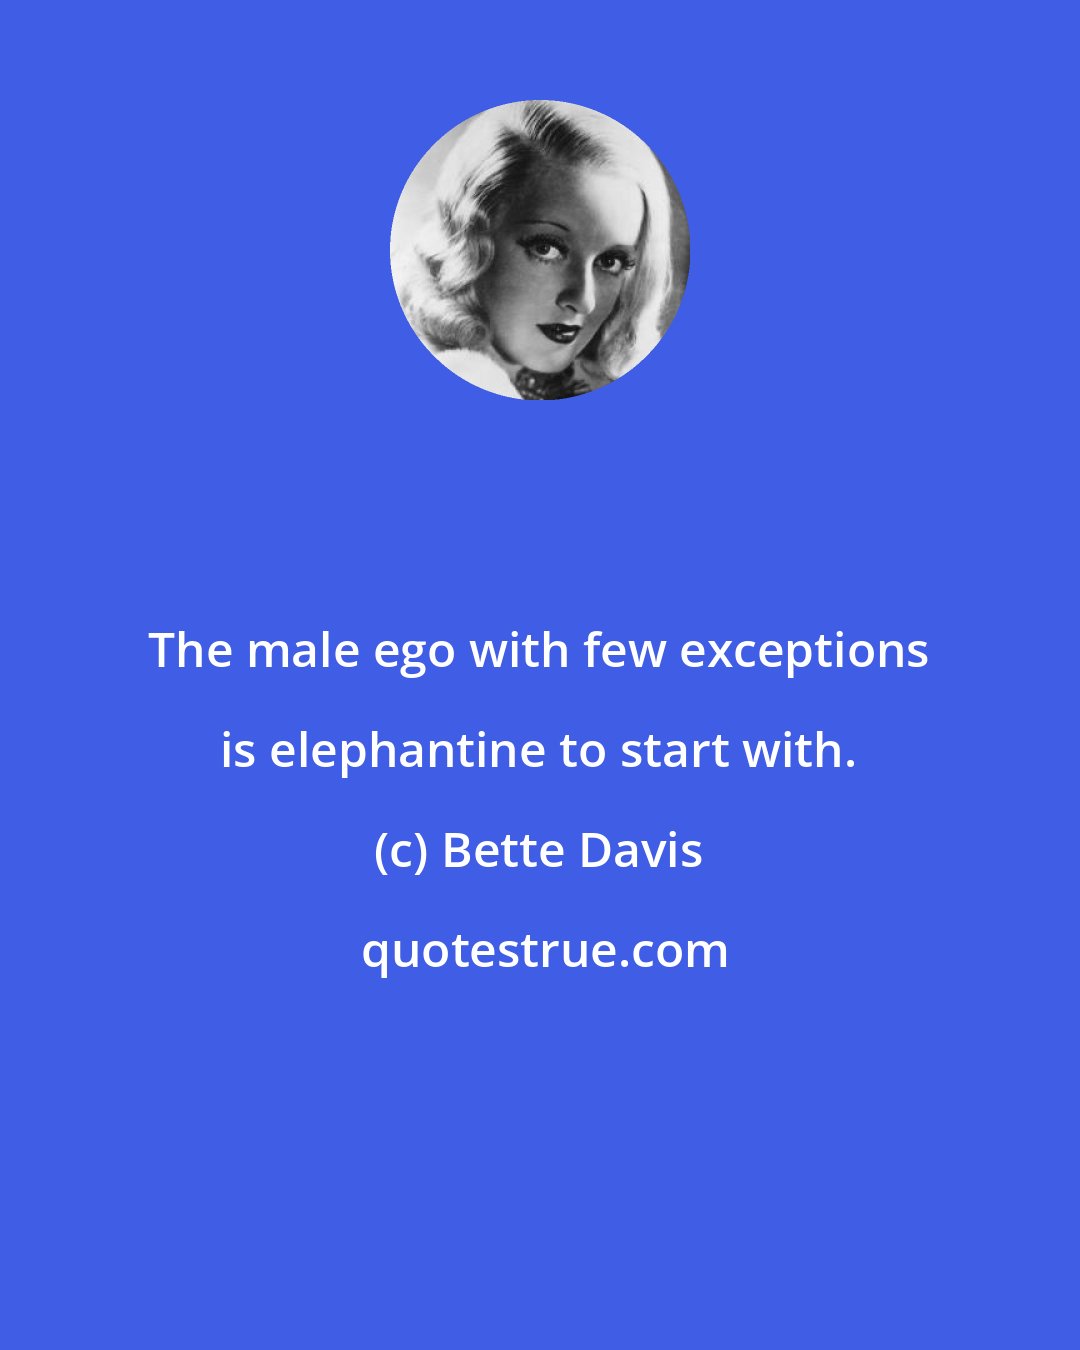 Bette Davis: The male ego with few exceptions is elephantine to start with.